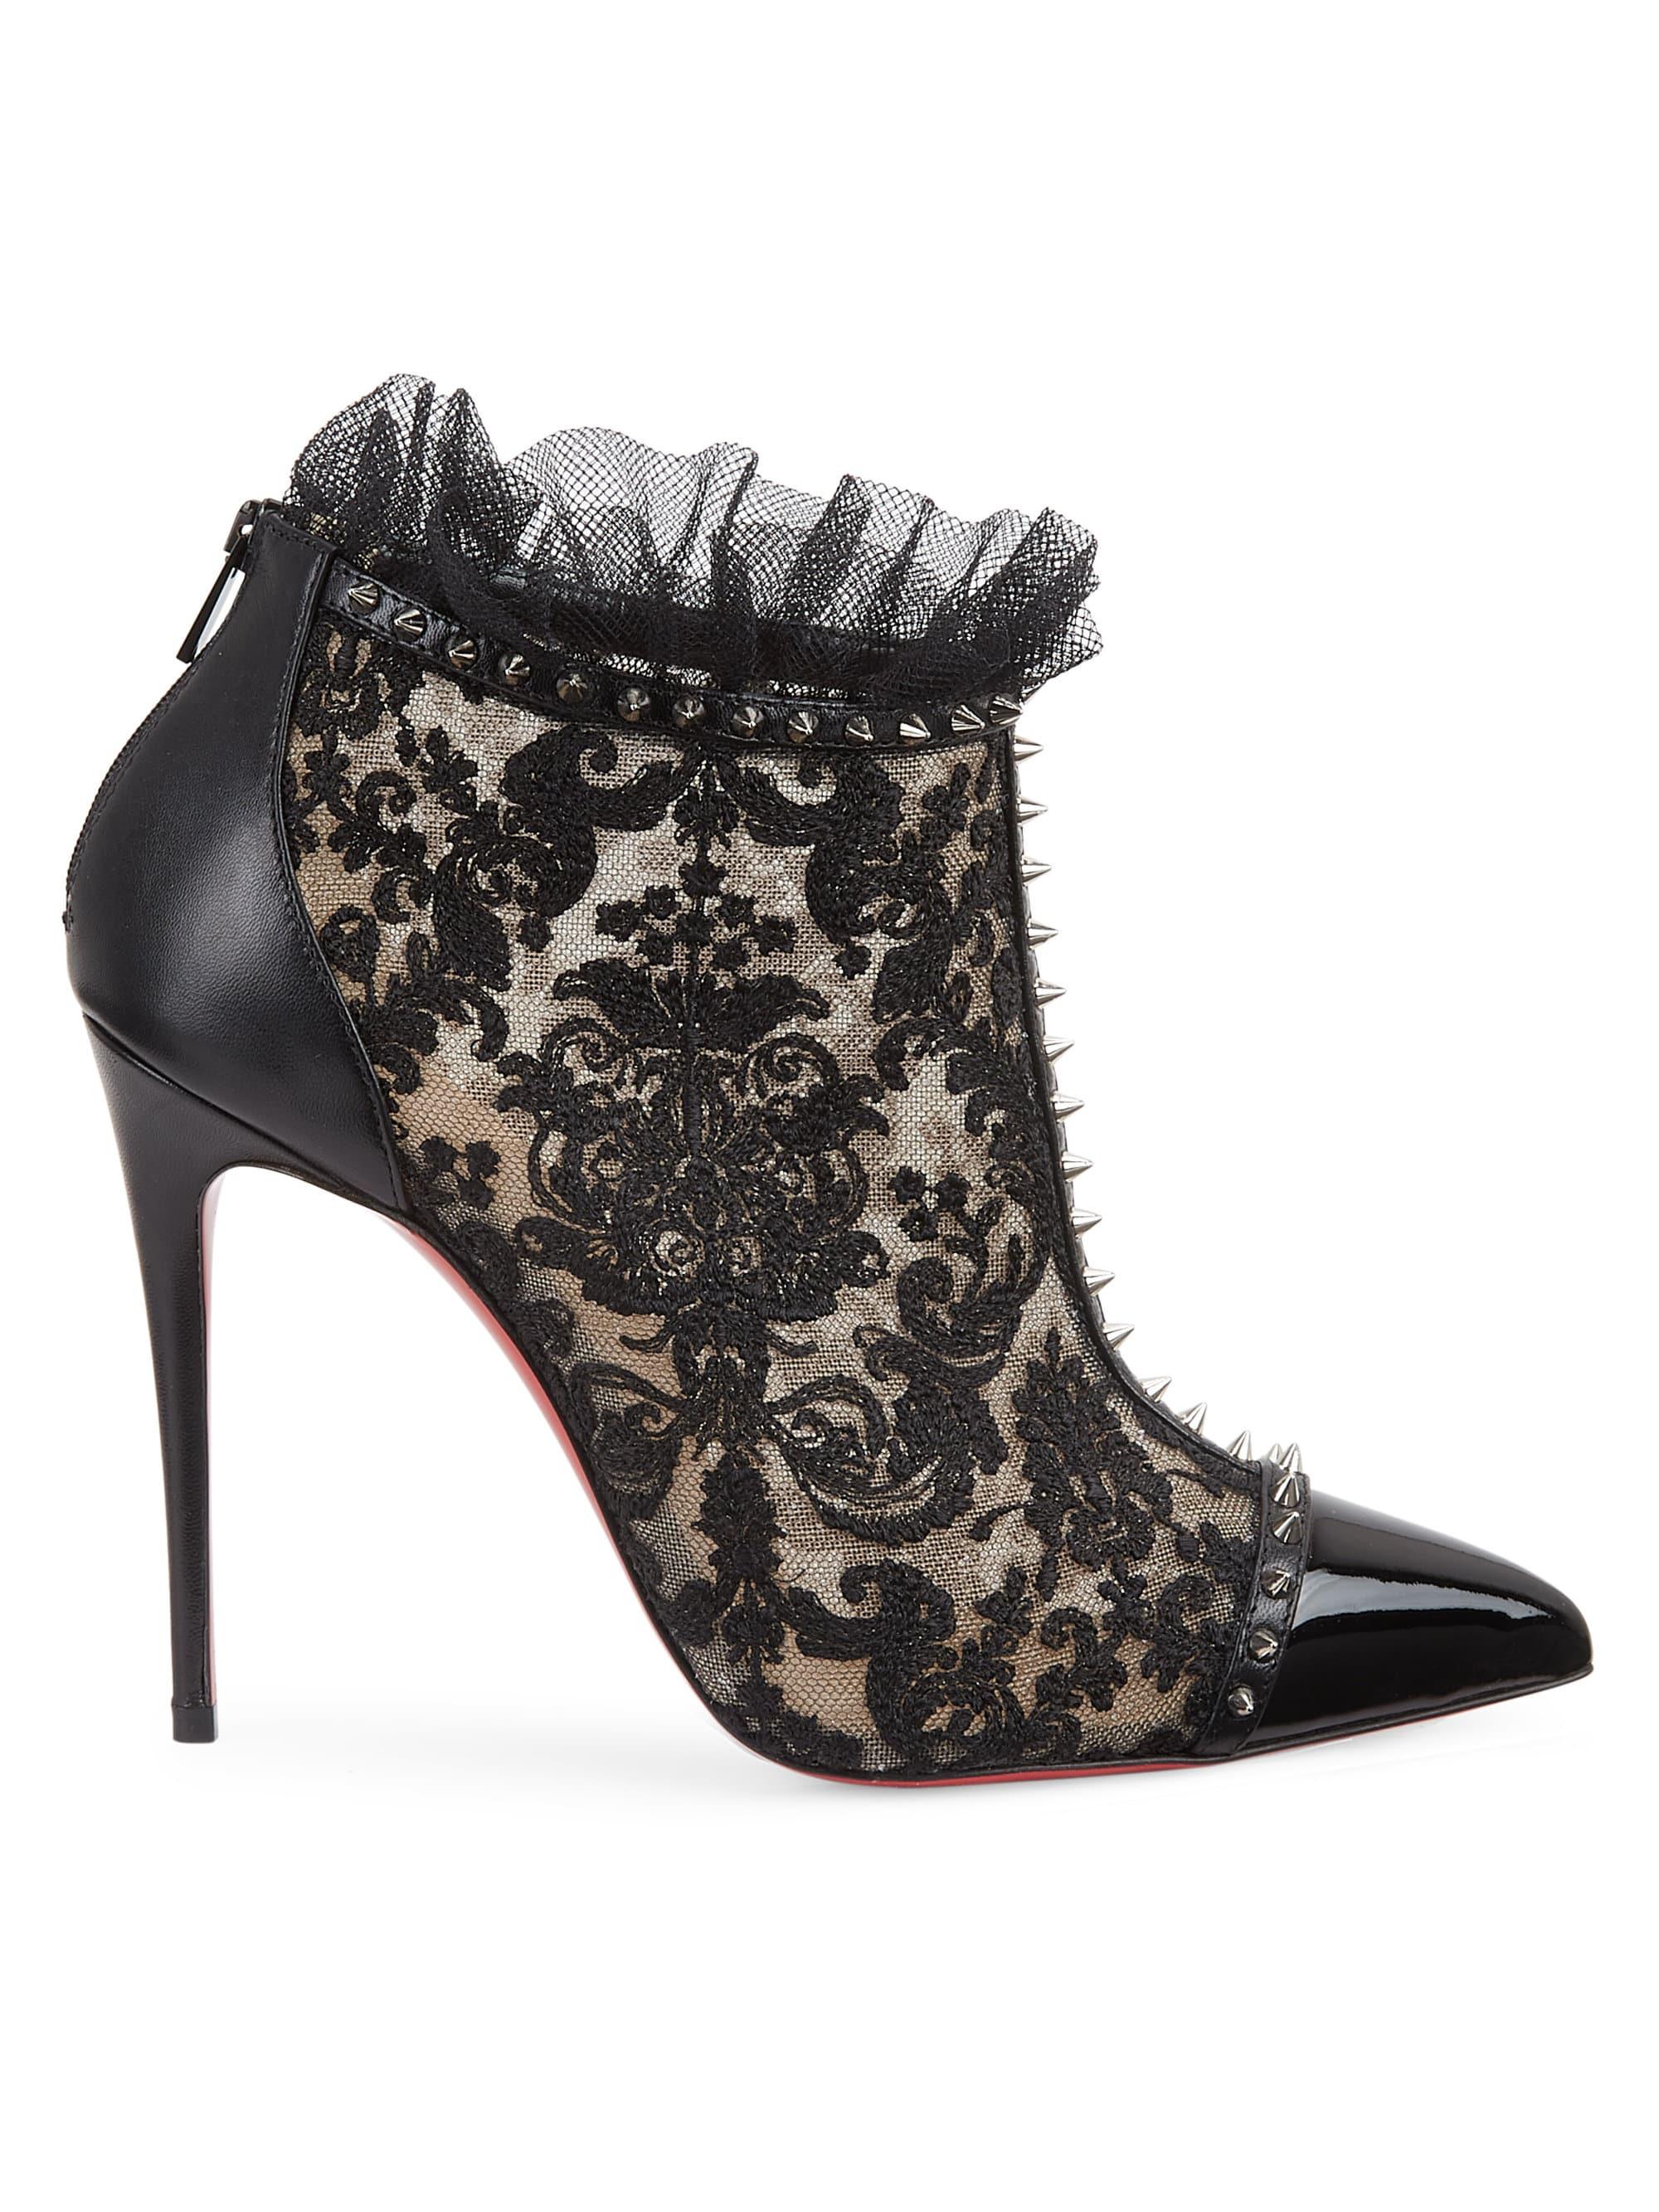 Christian Louboutin Pigalle 100 Studded Lace Booties in Black - Lyst